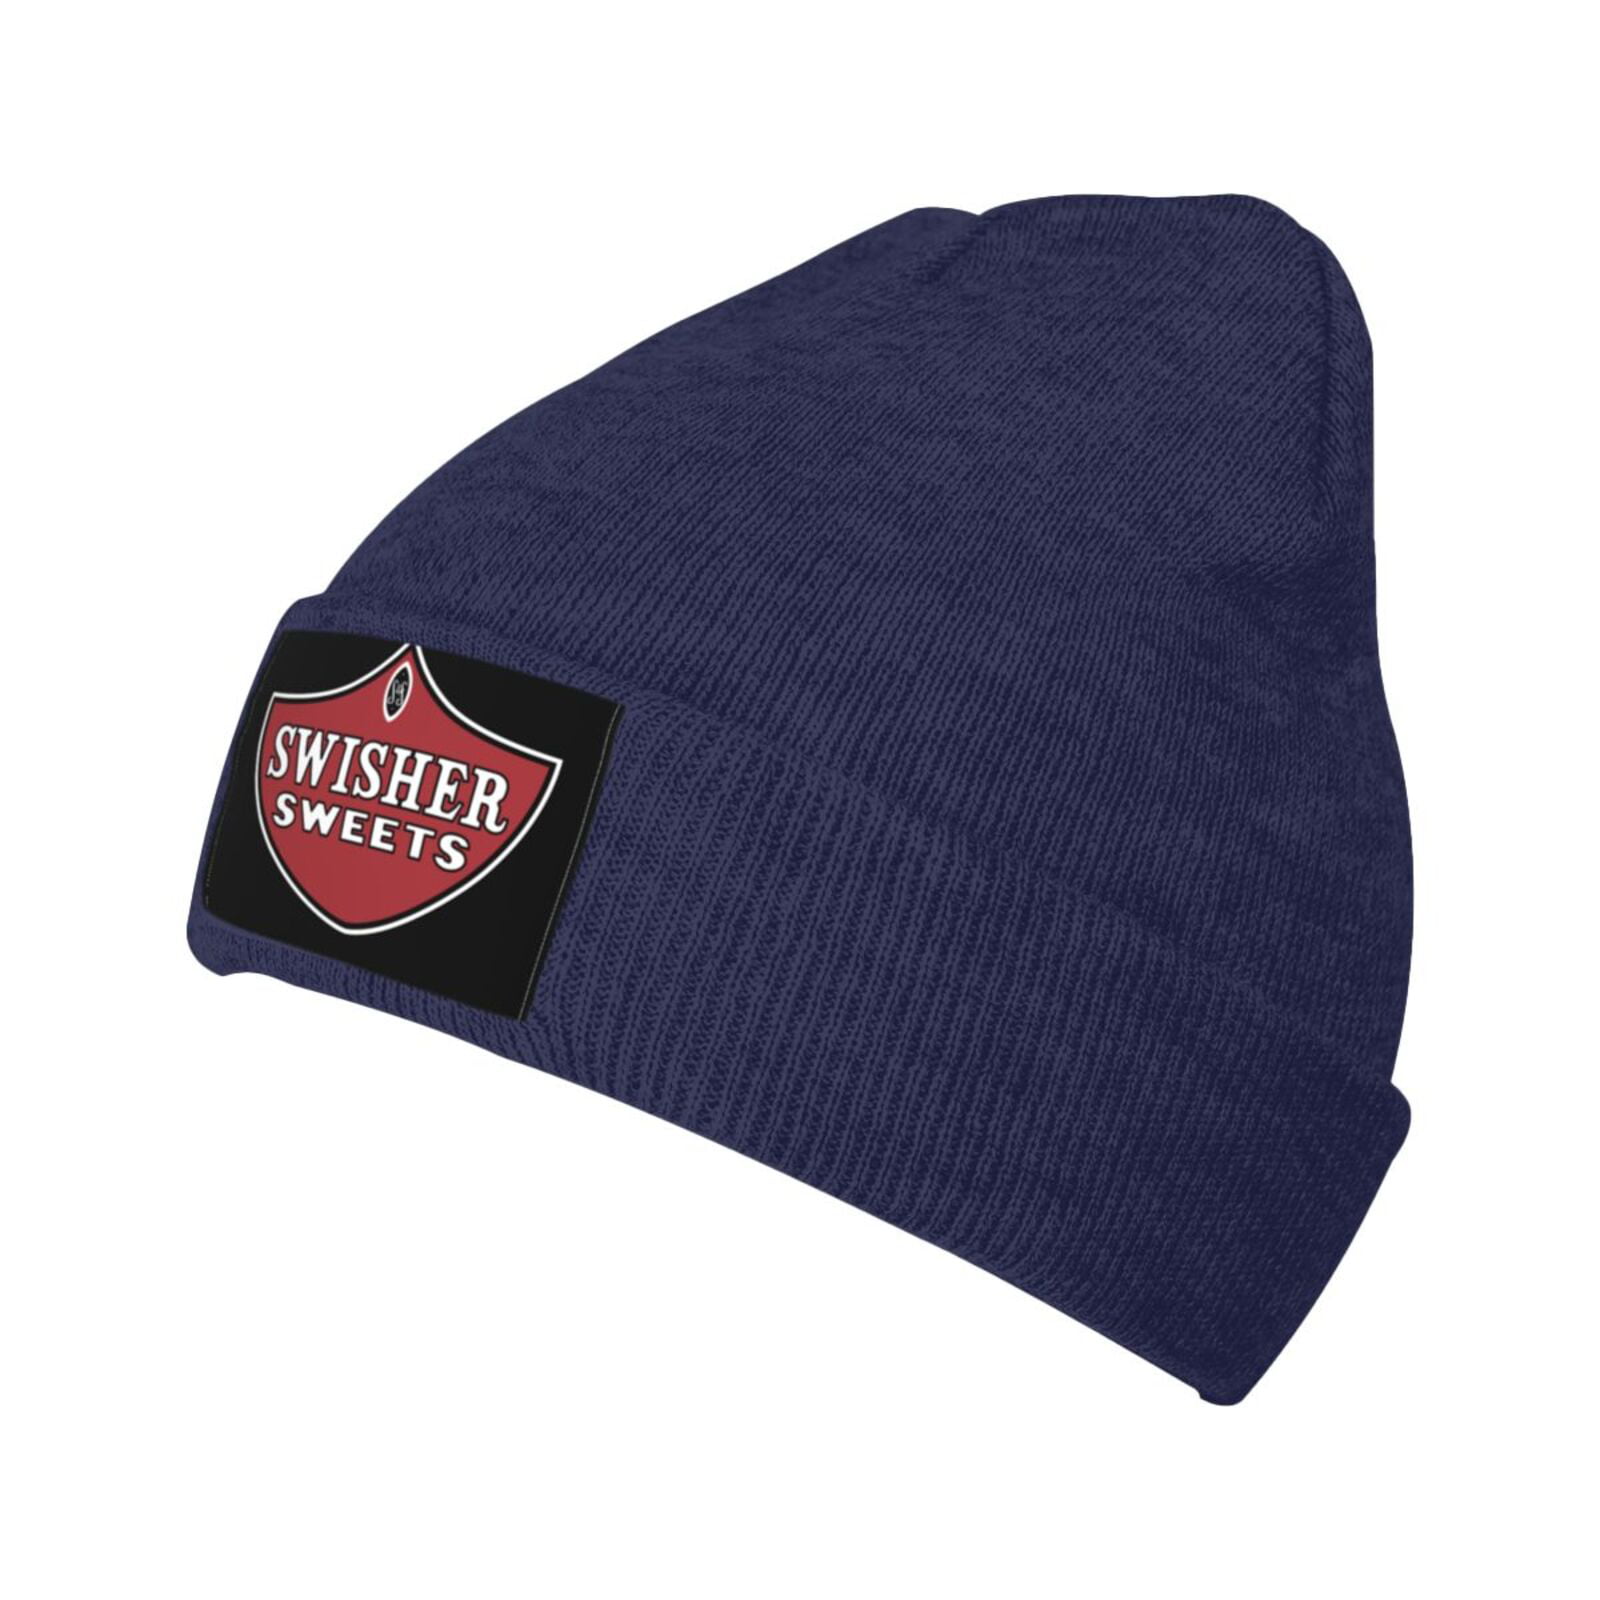 Swisher Sweets \\r\\nVikings Beanie Hat Cap Winter Softknit Stocking Cap  Slouchy Headwear For Adult Outdoor Navy Blue